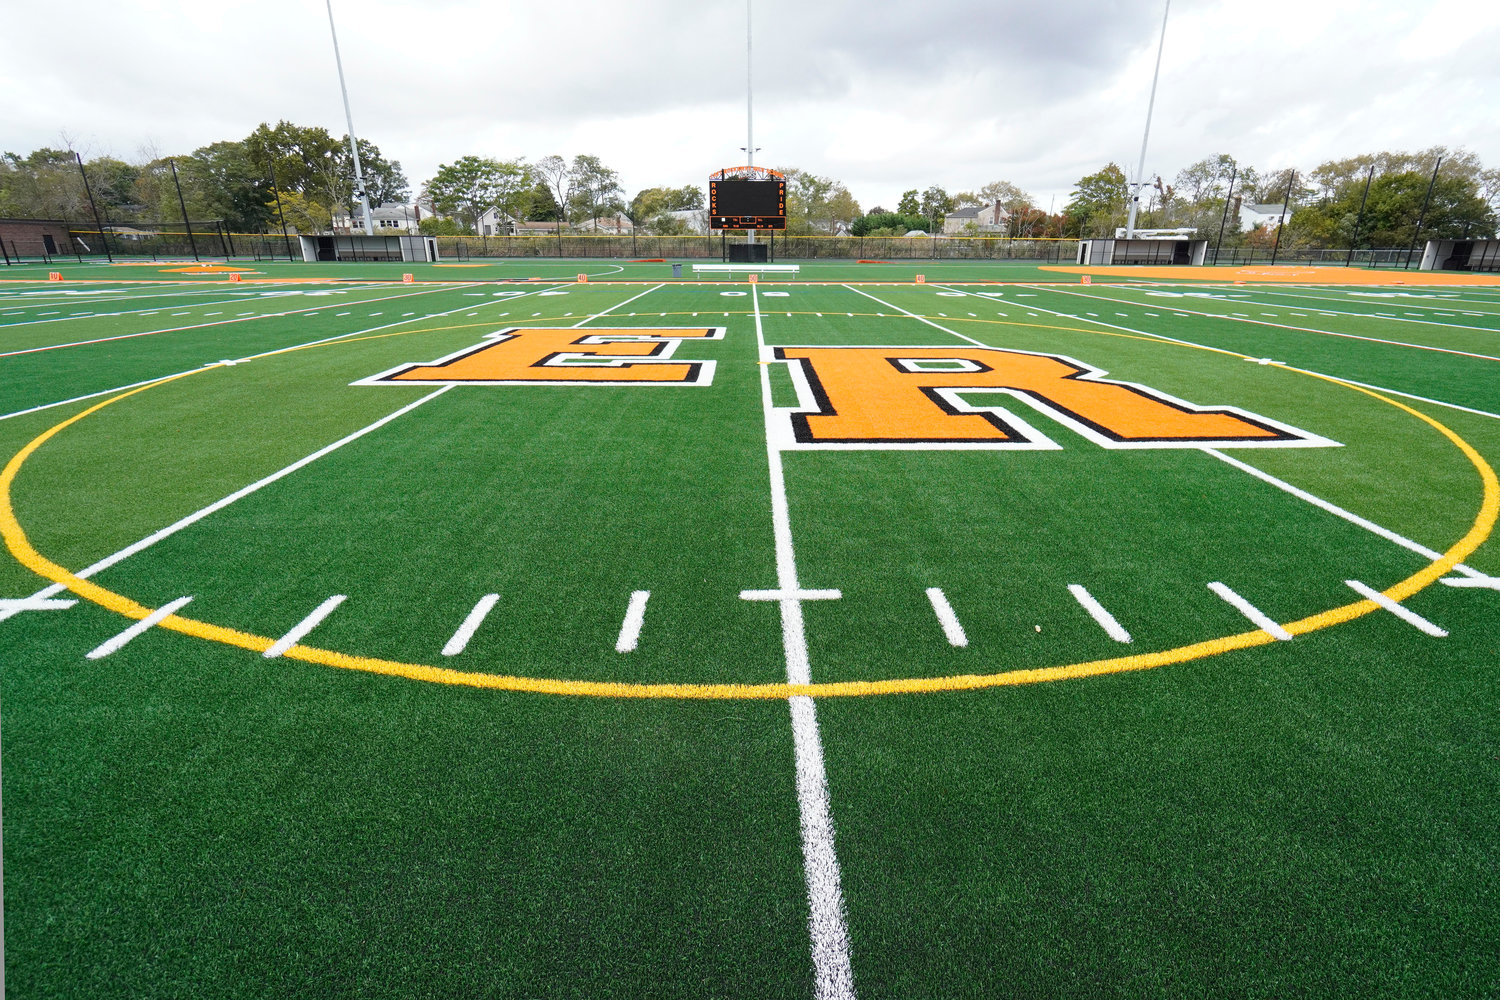 The artificial-turf fields will be used by many teams.